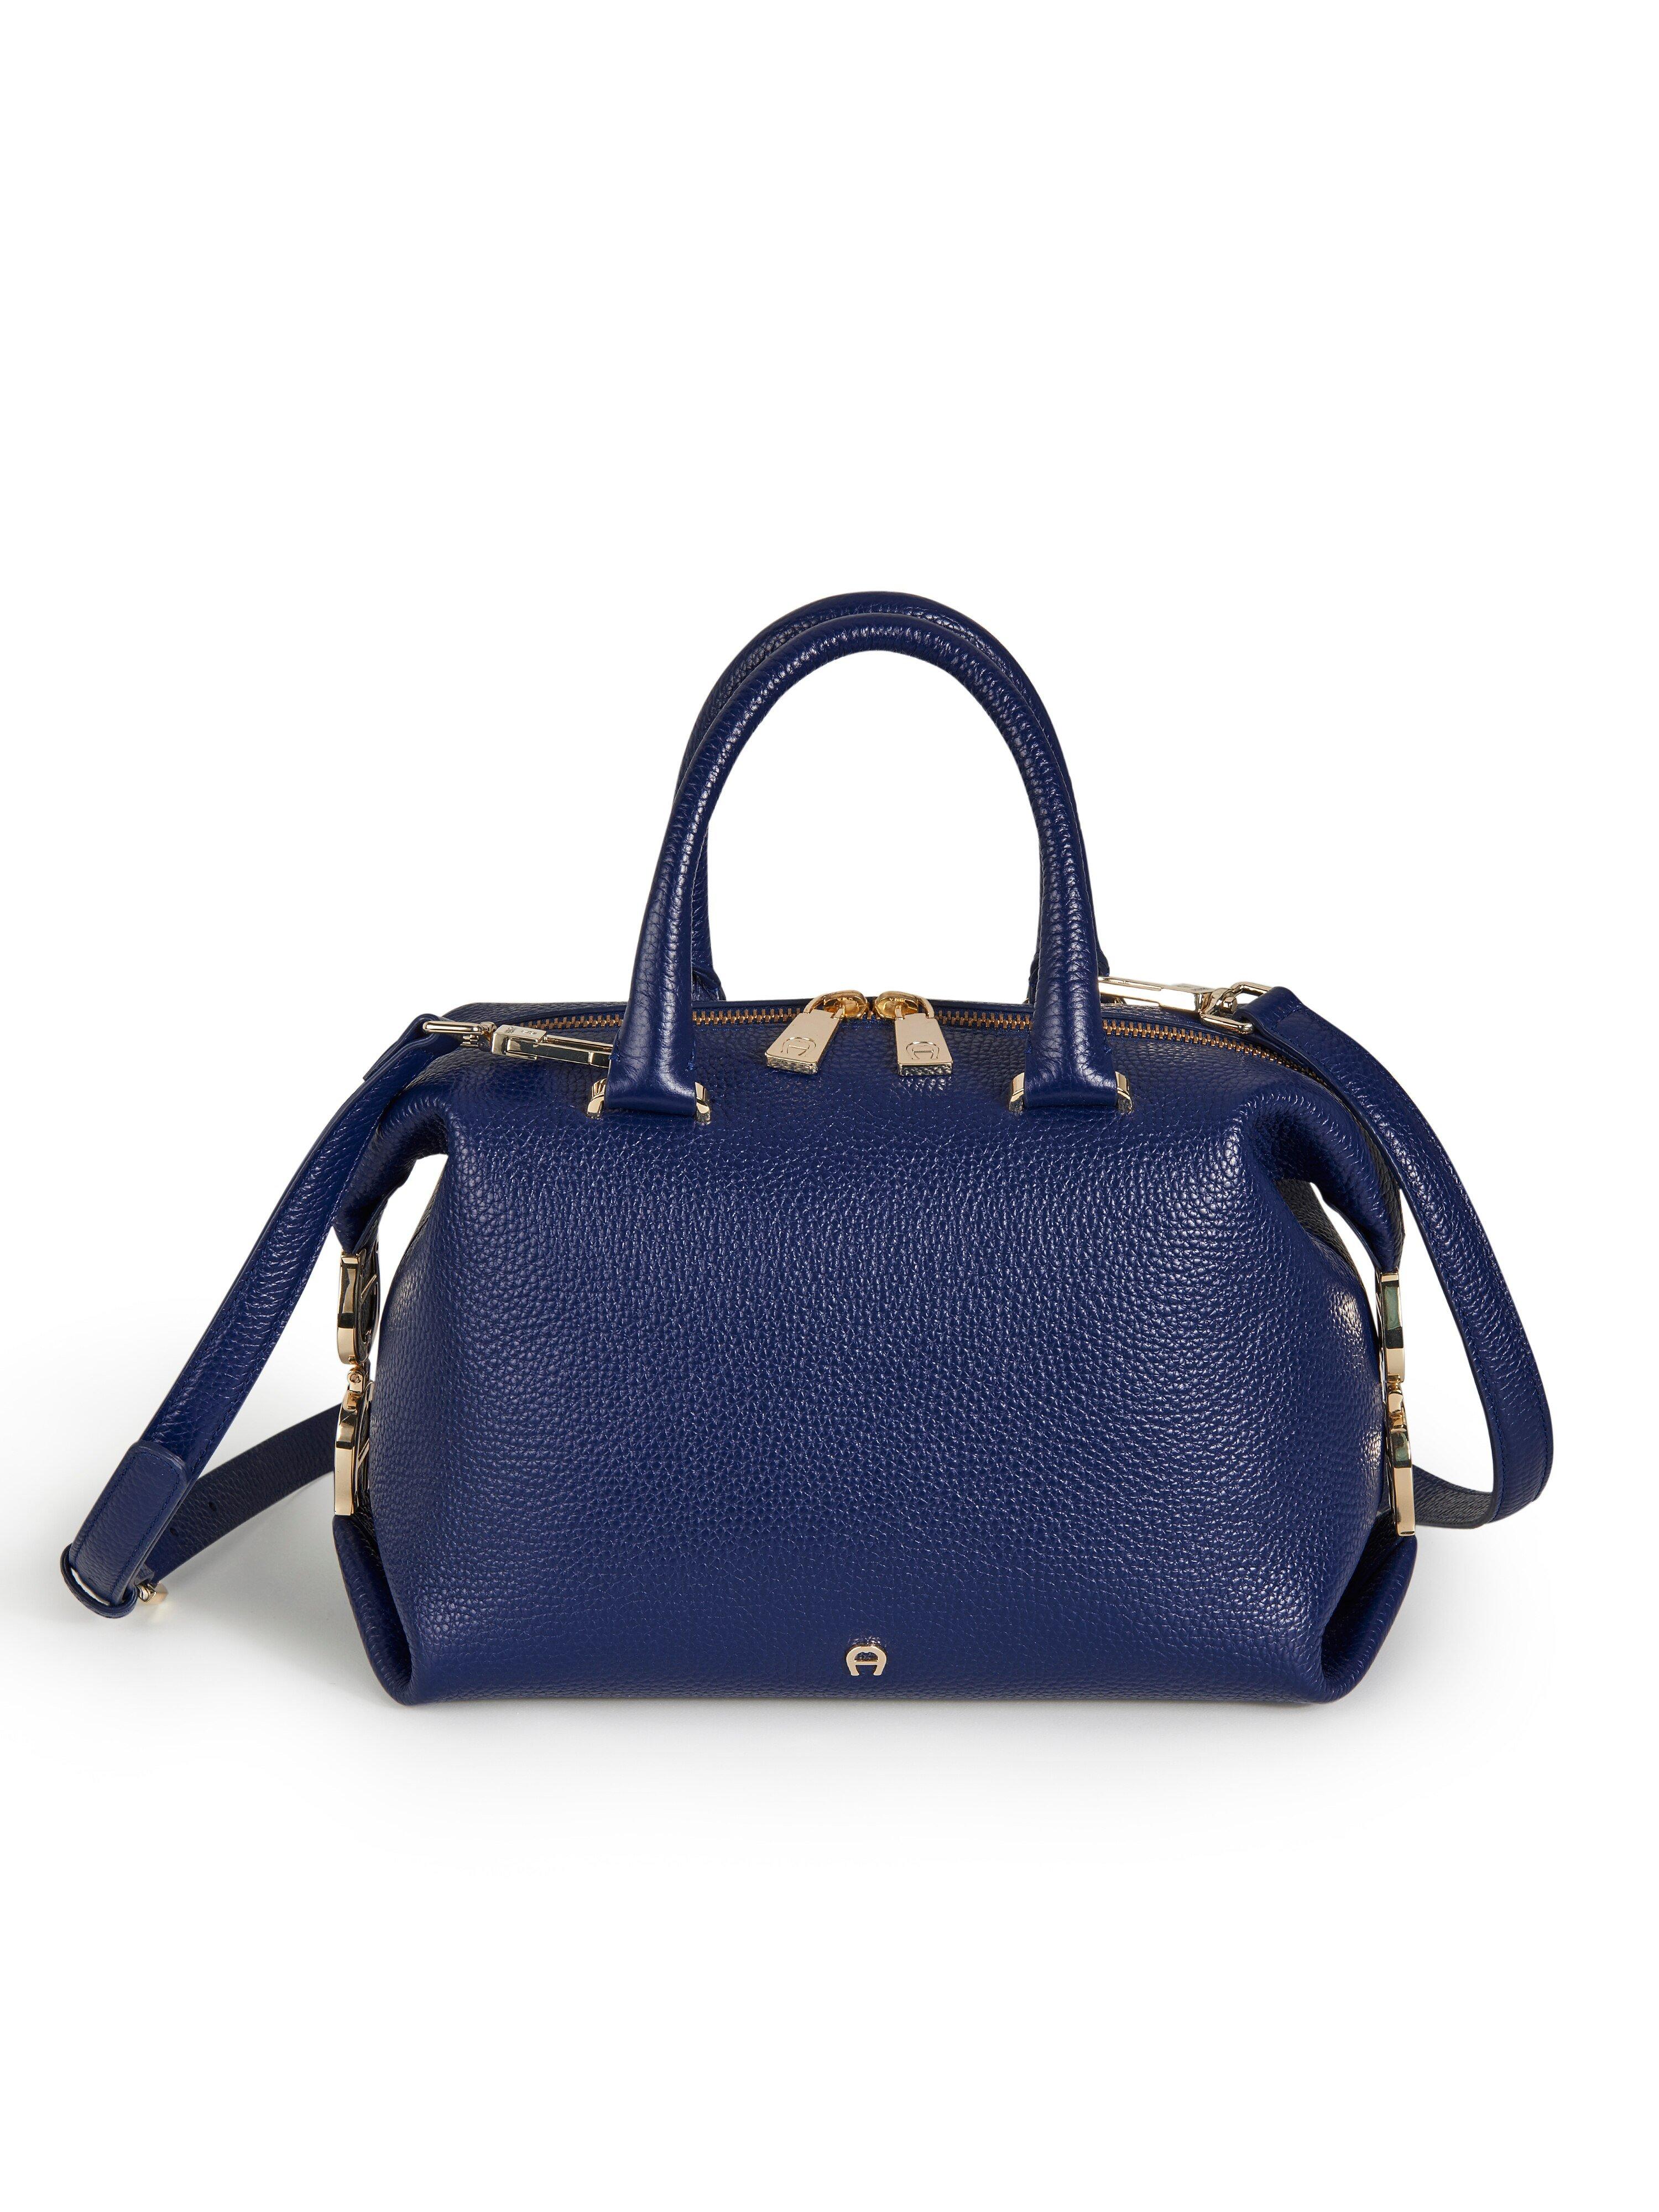 Aigner - Roma bag in 100% leather - blue